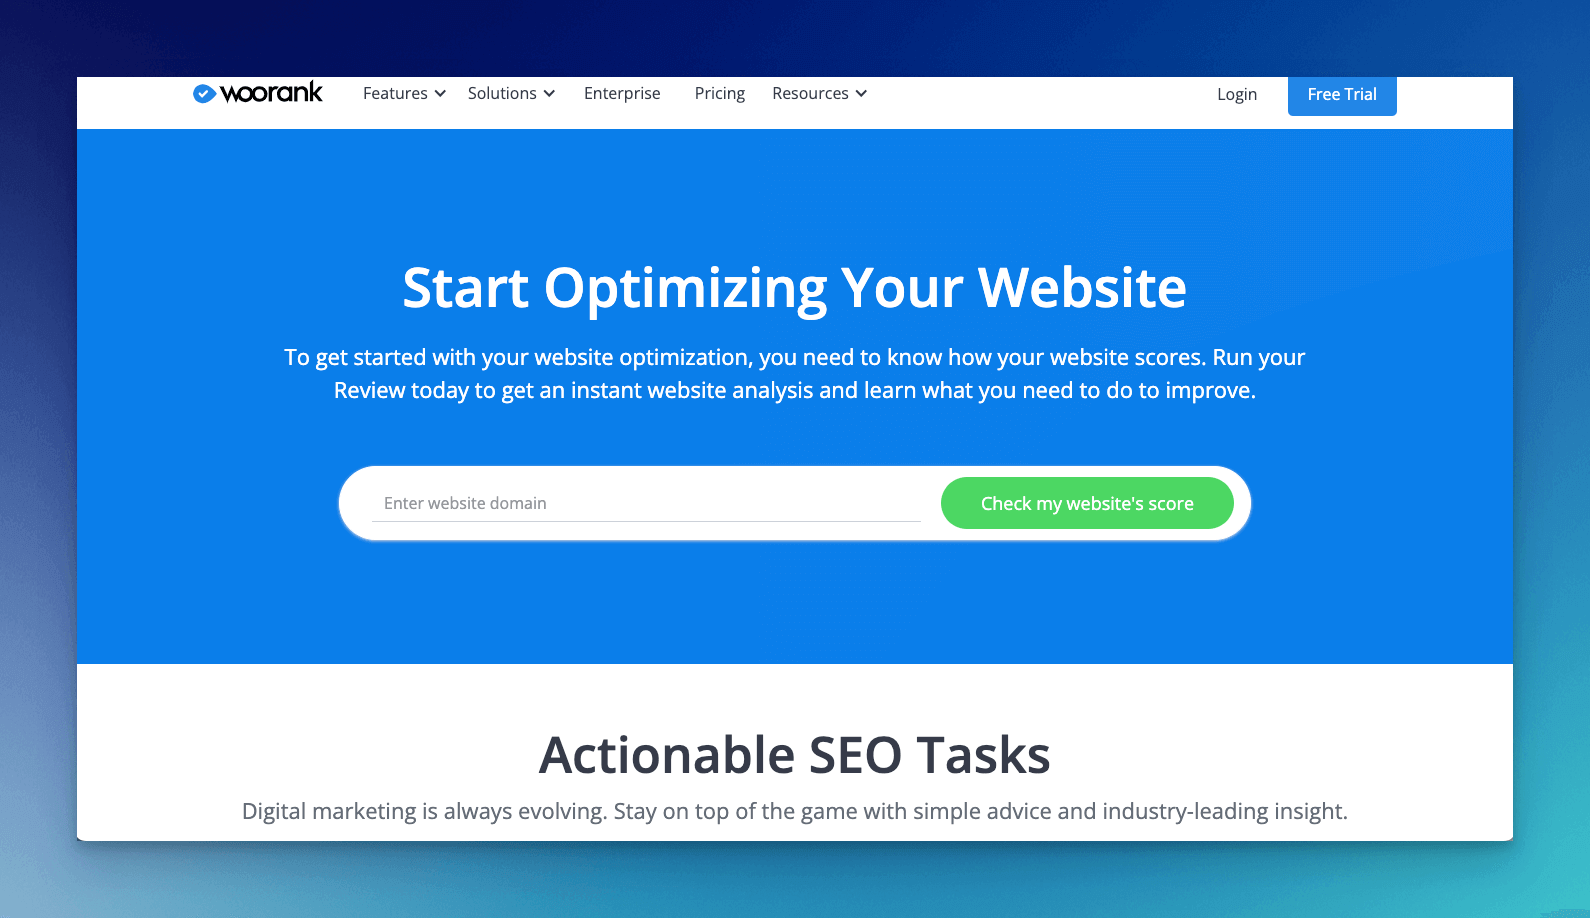 WooRank seo crawler tool homepage with blue background and a text that says "start optimizing your website"